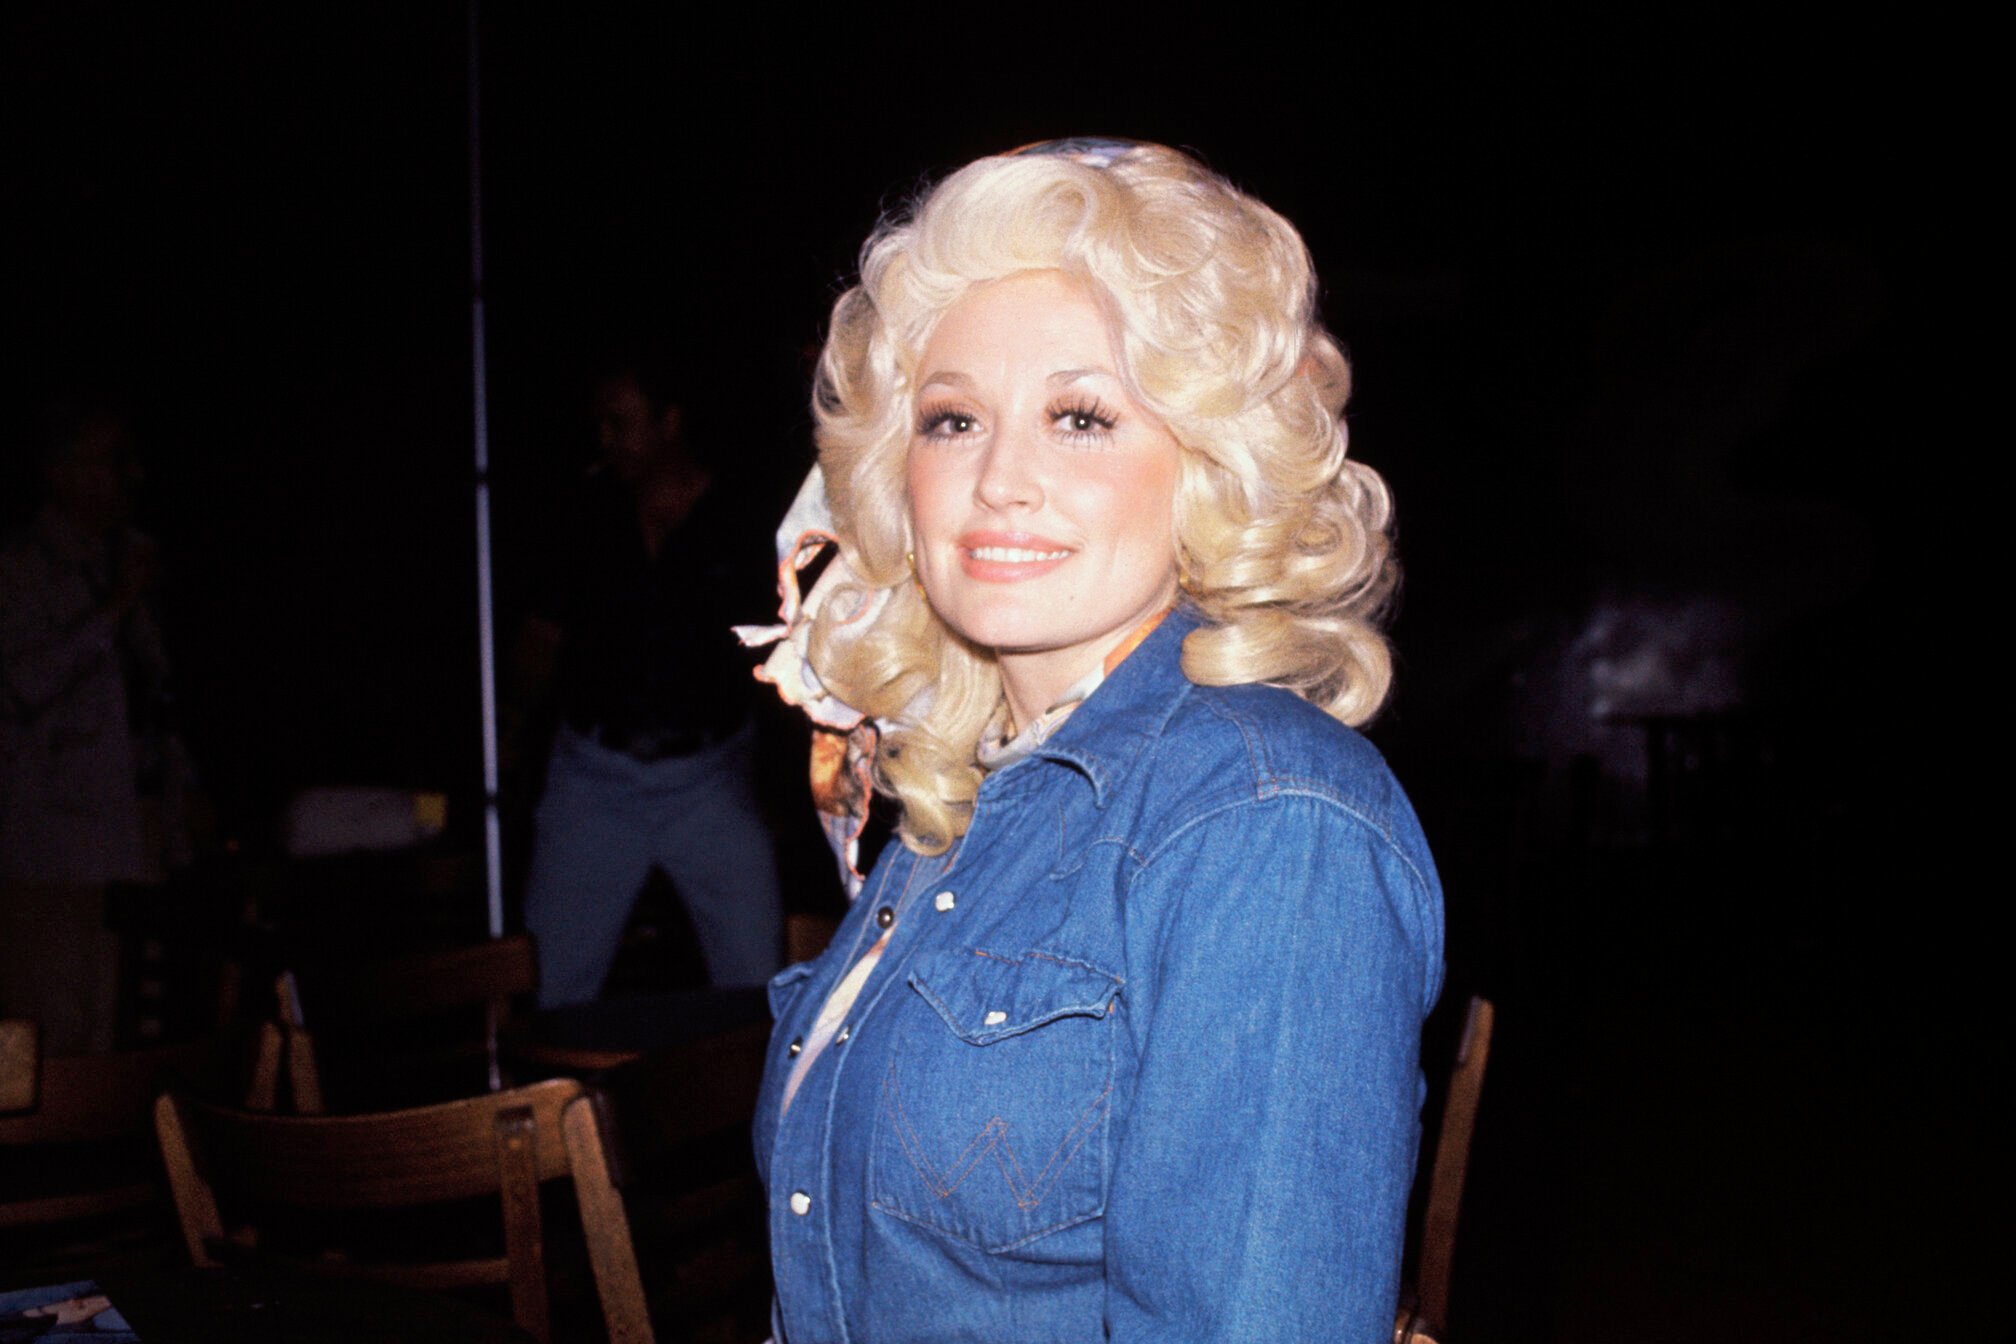 Dolly Parton in a jean shirt with big, curly blond hair.